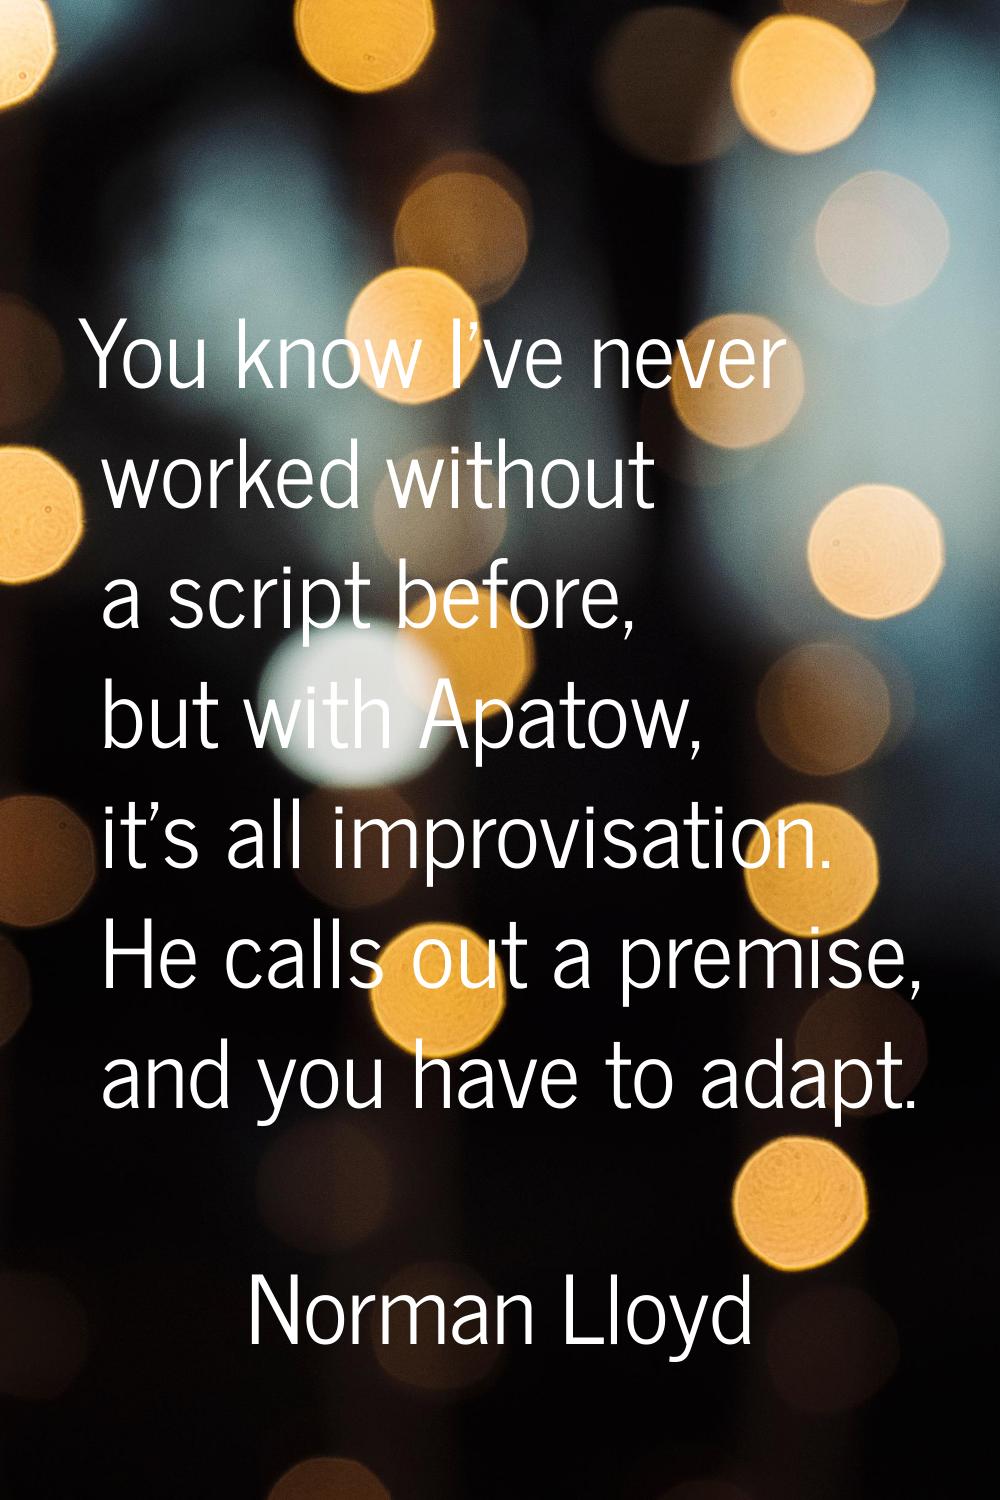 You know I've never worked without a script before, but with Apatow, it's all improvisation. He cal